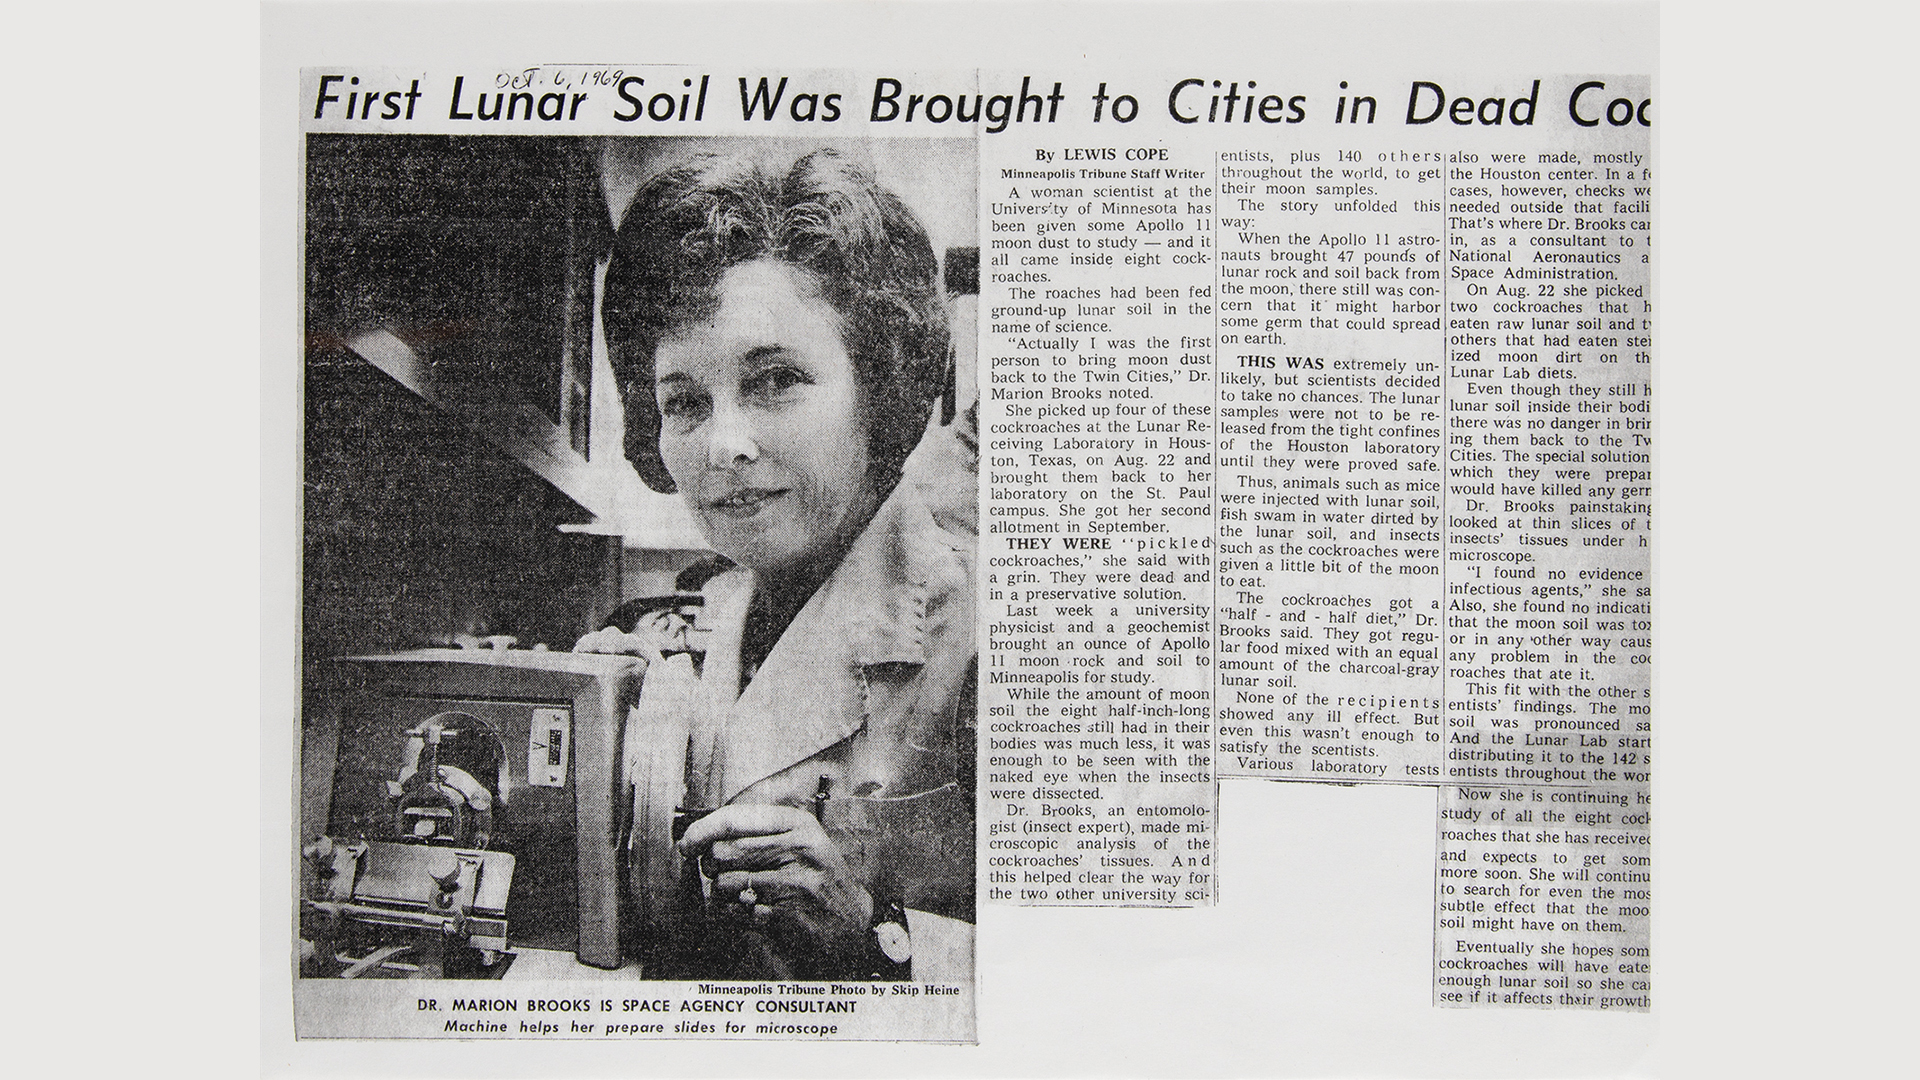 A newspaper clipping dated Oct. 6, 1969 outlining the work of University of Minnesota entomologist Marion Brooks, who studied moondust by feeding it to cockroaches.